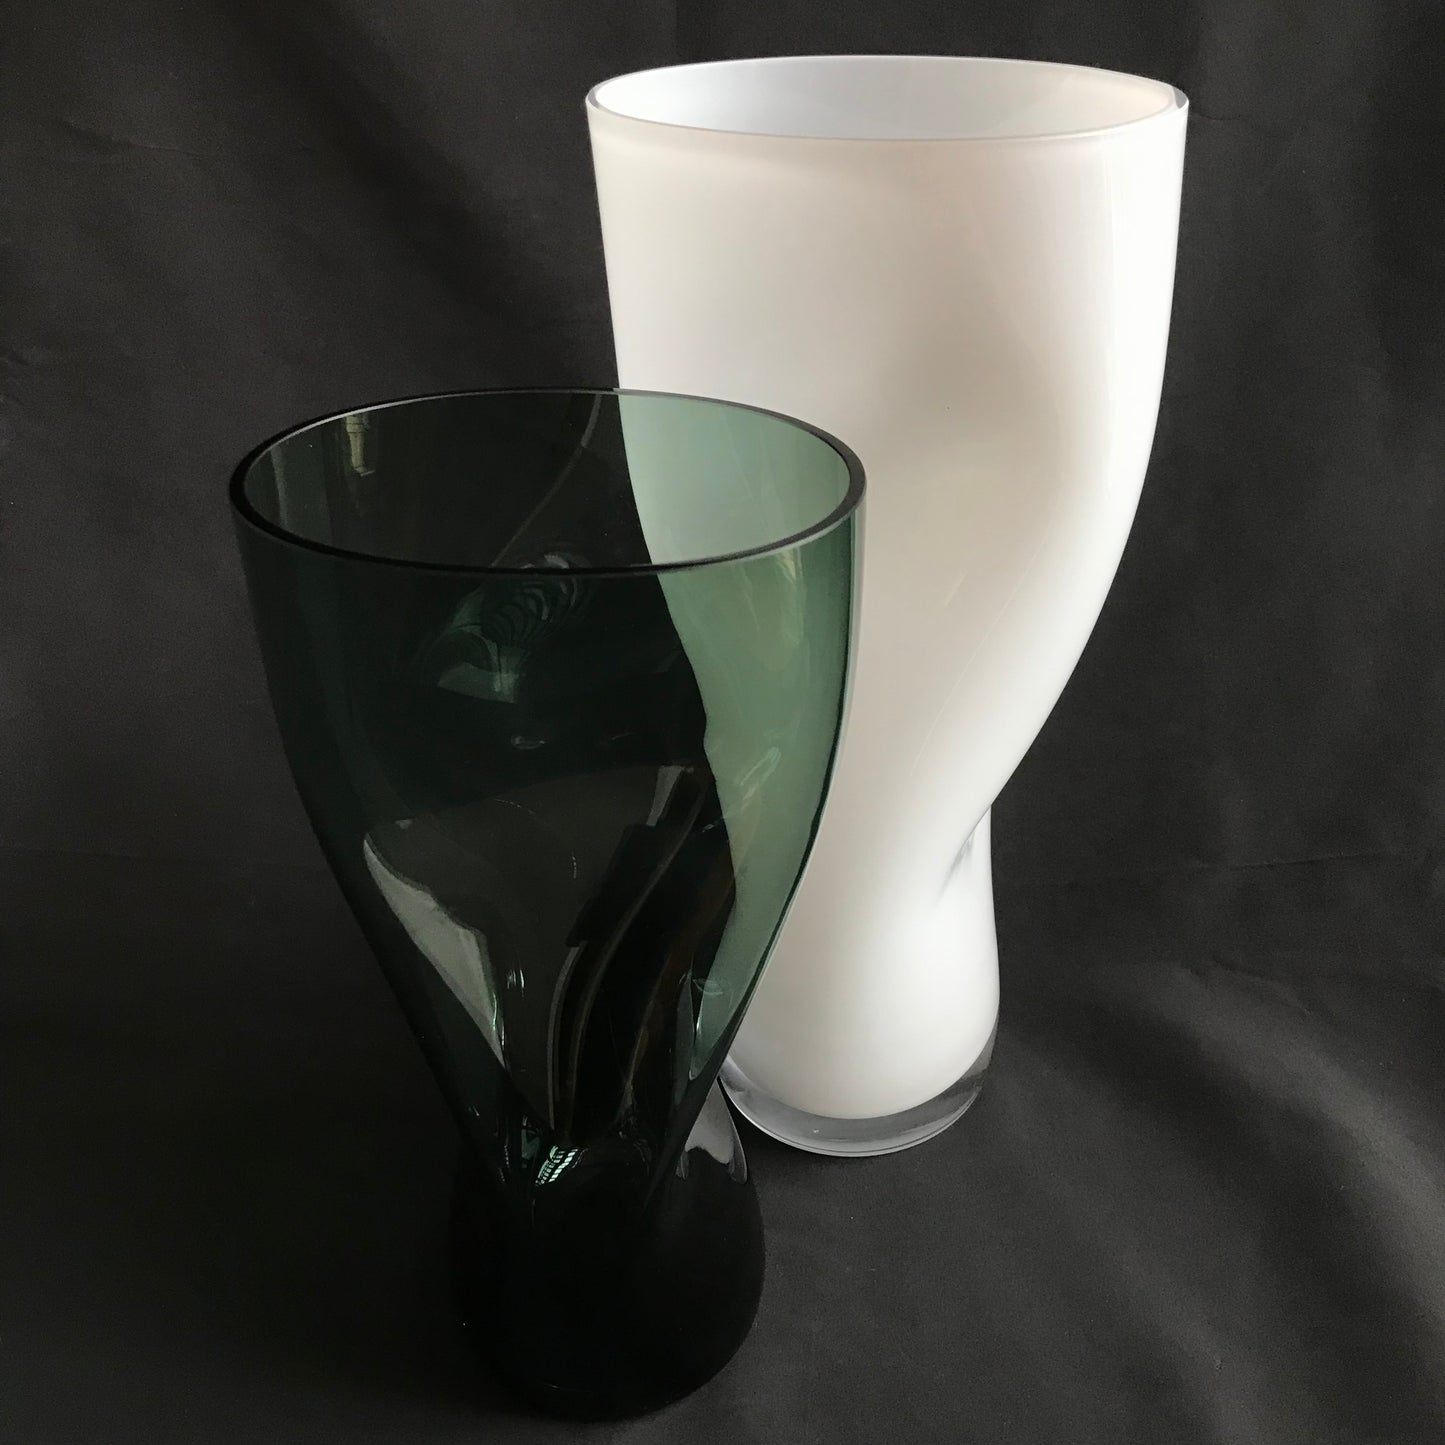 White Glass “Squeeze Vase” by Orrefors